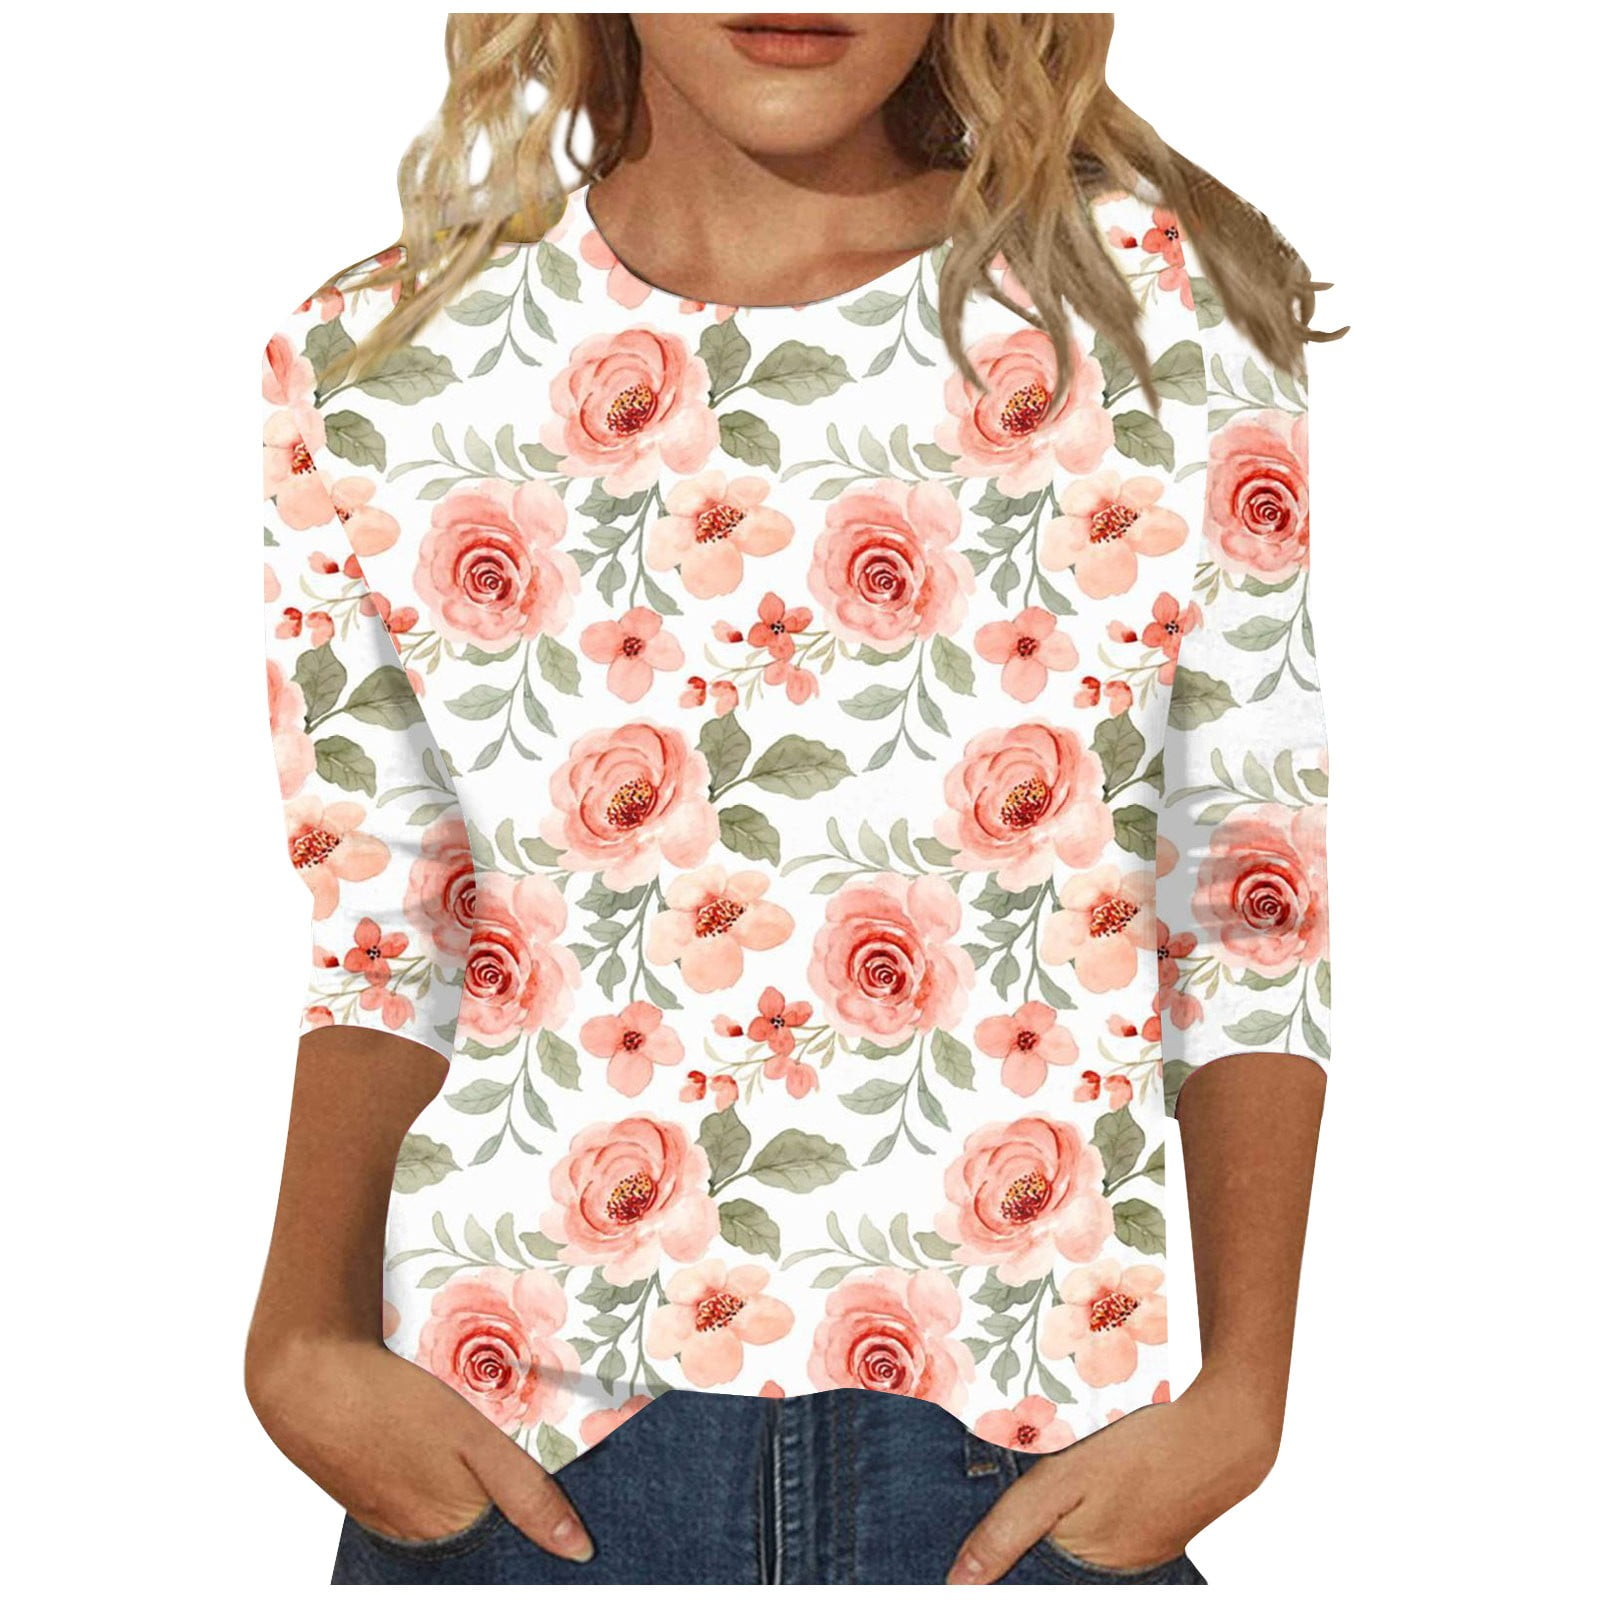 RPVATI 3/4 Length Sleeve Tops Women Comfy Loose Fit Floral Tshirts ...